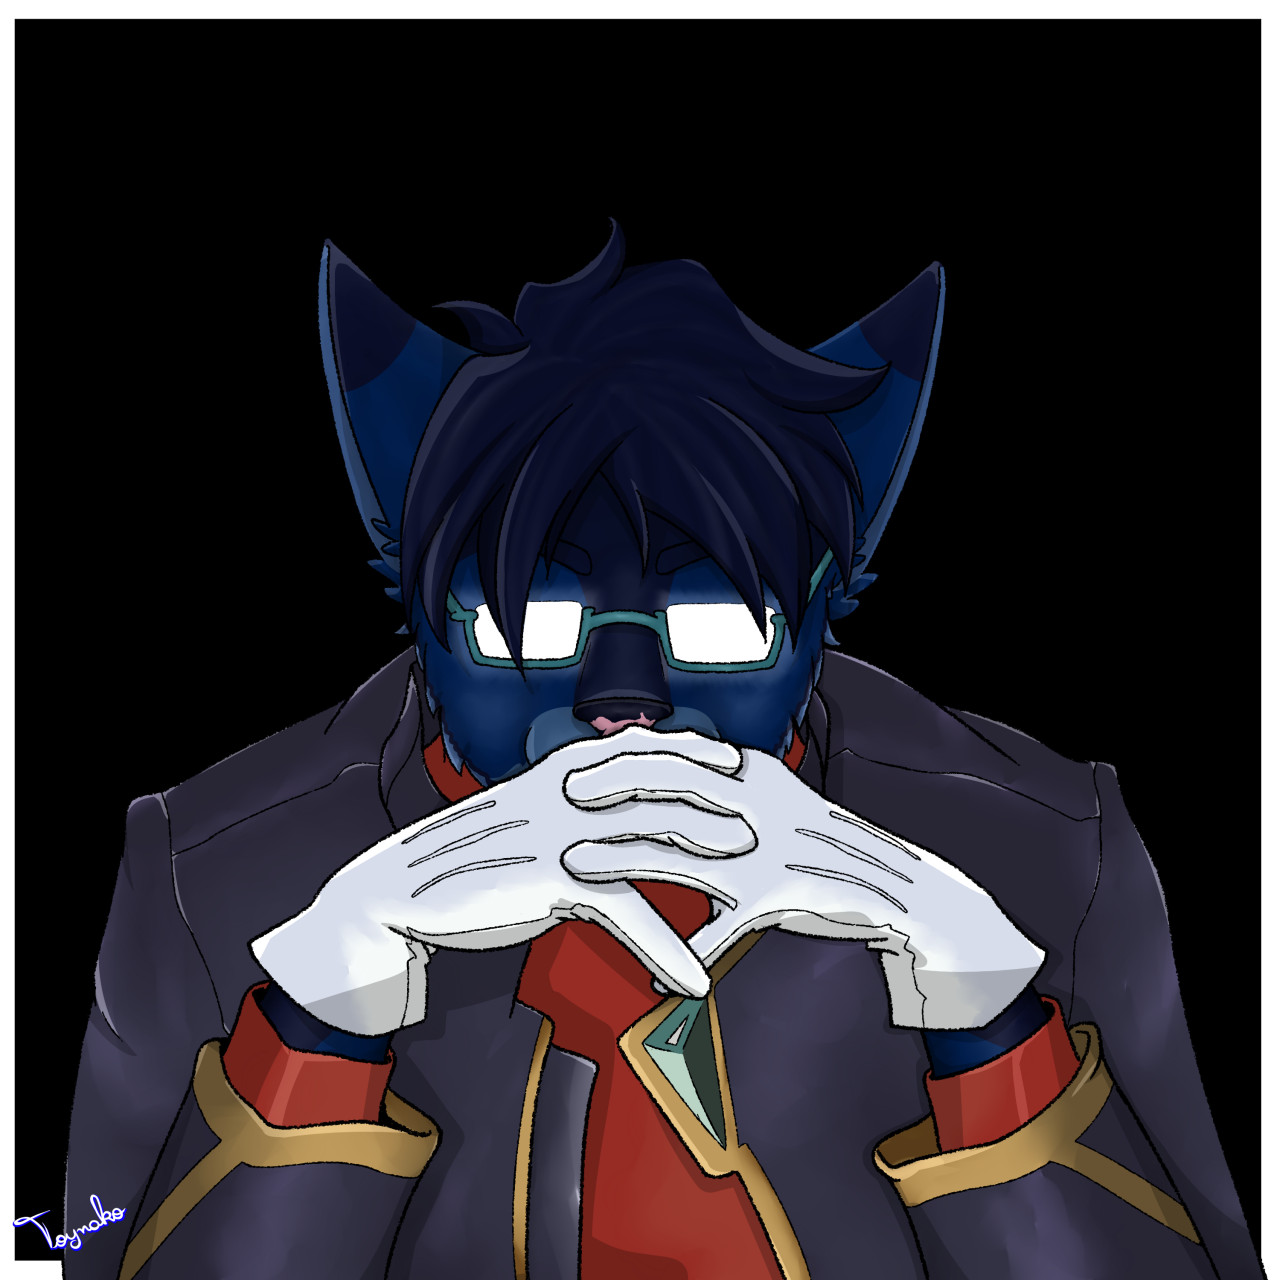 Gendo Pose Merch & Gifts for Sale | Redbubble